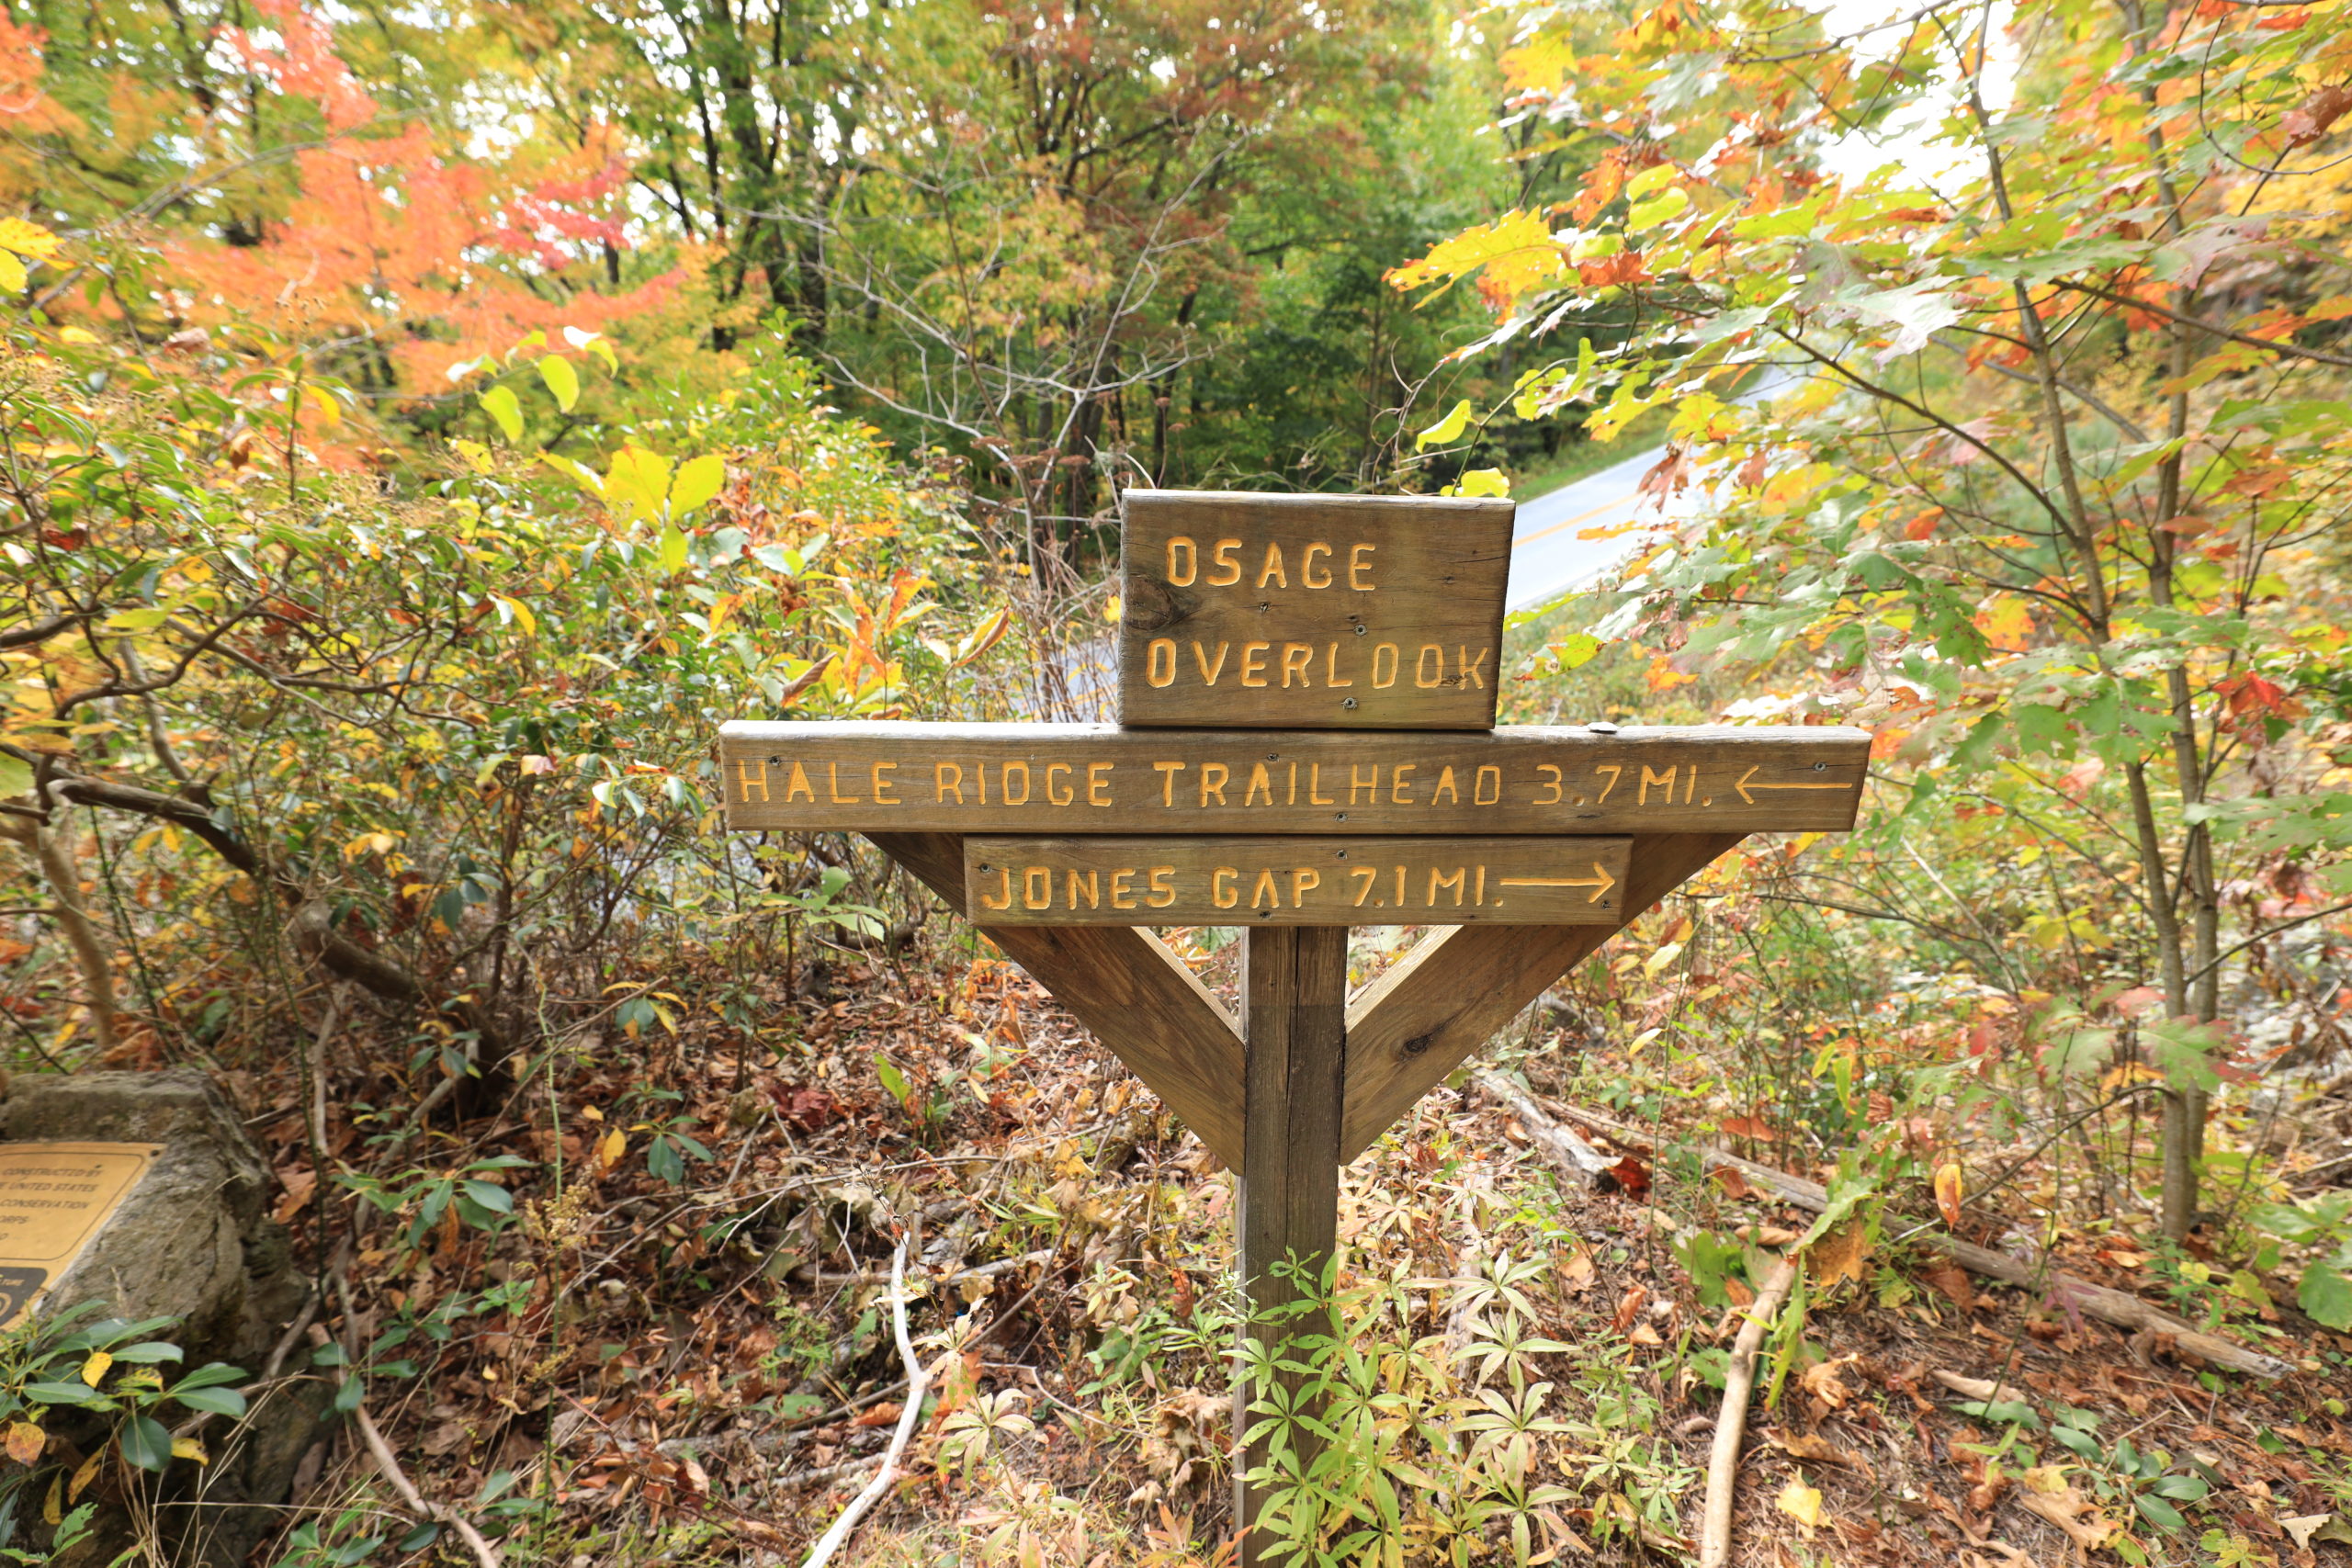 Trailhead sign at Osage Overlook on the Bartram Trail